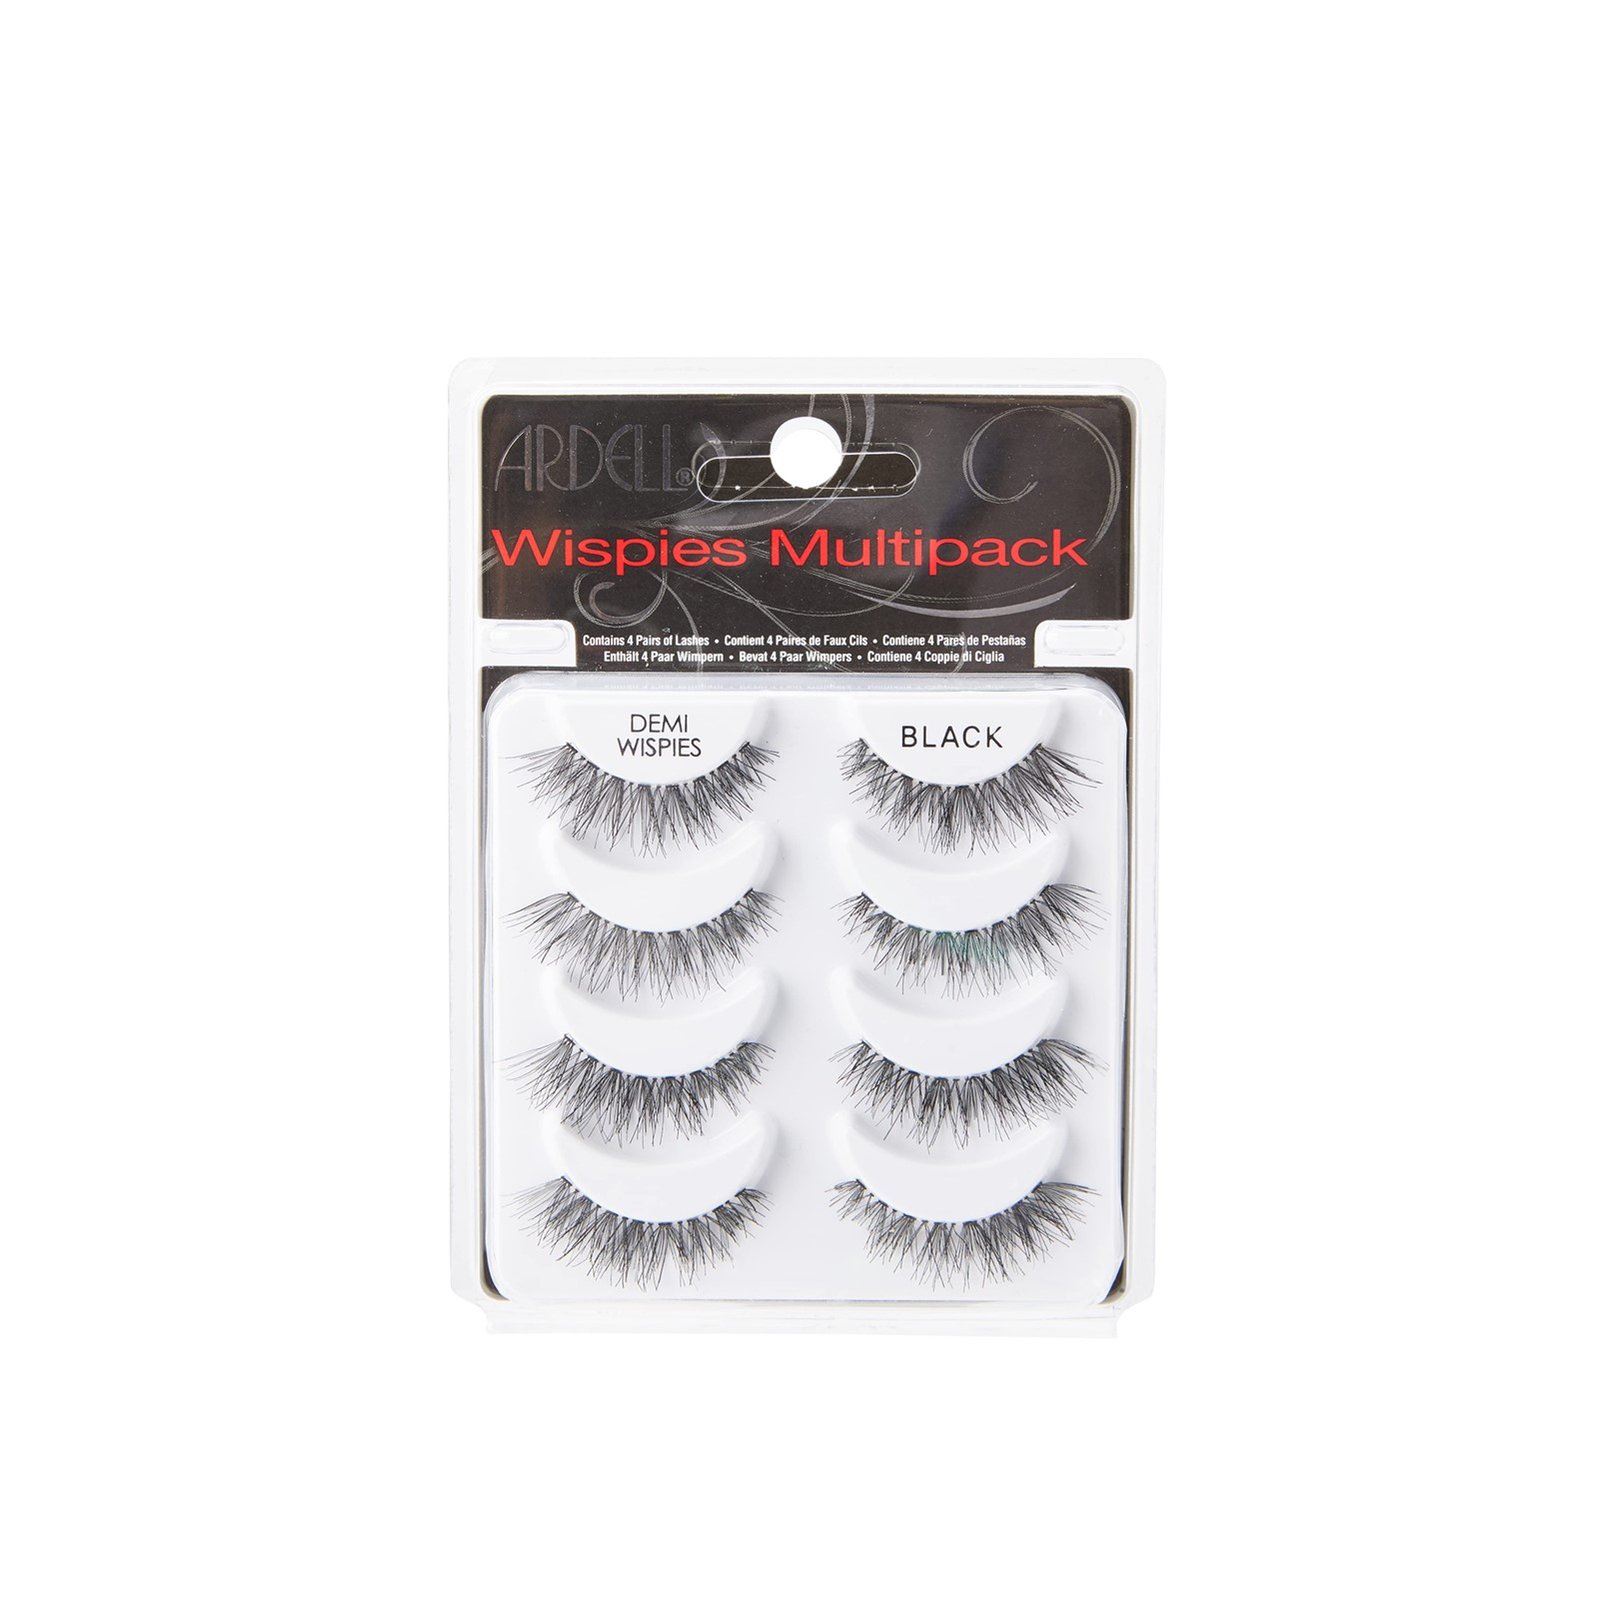 Ardell Demi Wispies Lashes Black Multipack